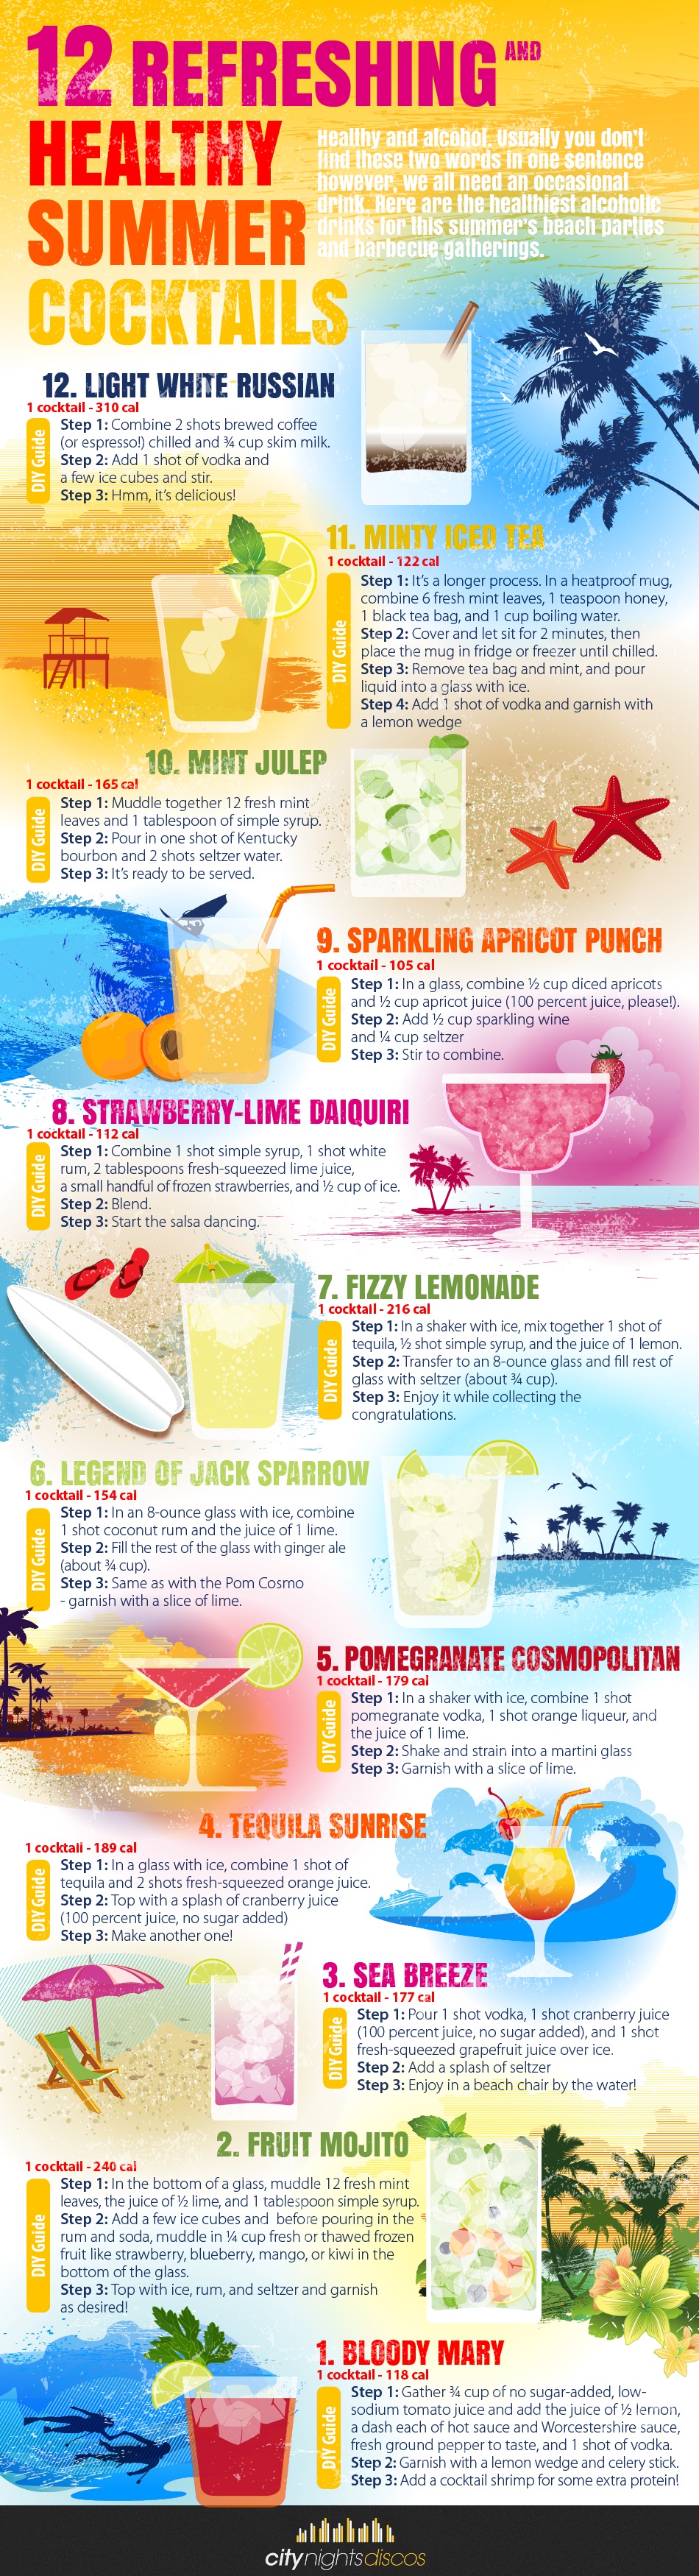 12 Refreshing and Healthy Summer Cocktails